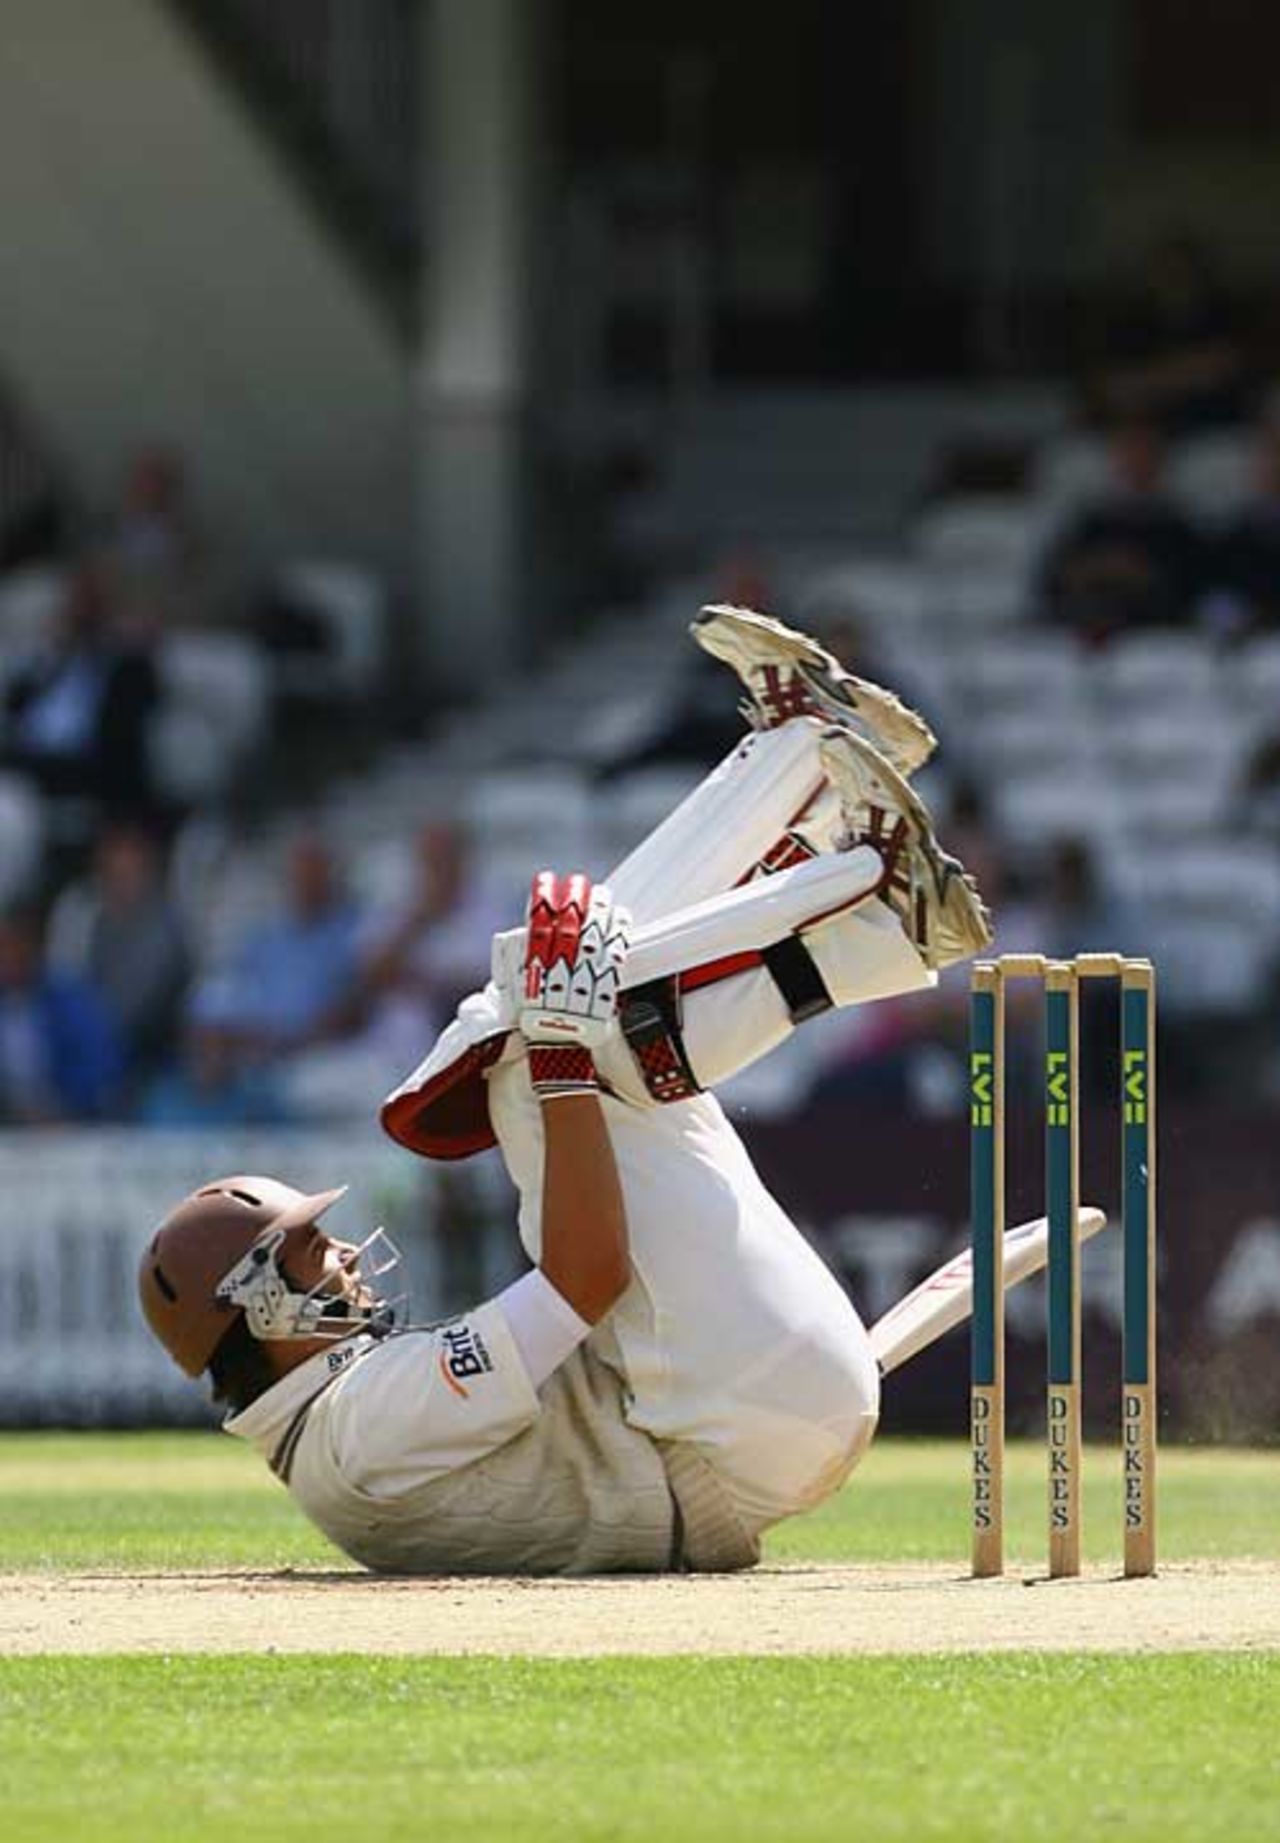 Jade Dernbach falls flat on his back after avoiding a bouncer, Surrey v Durham, County Championship, The Oval, July 9, 2007